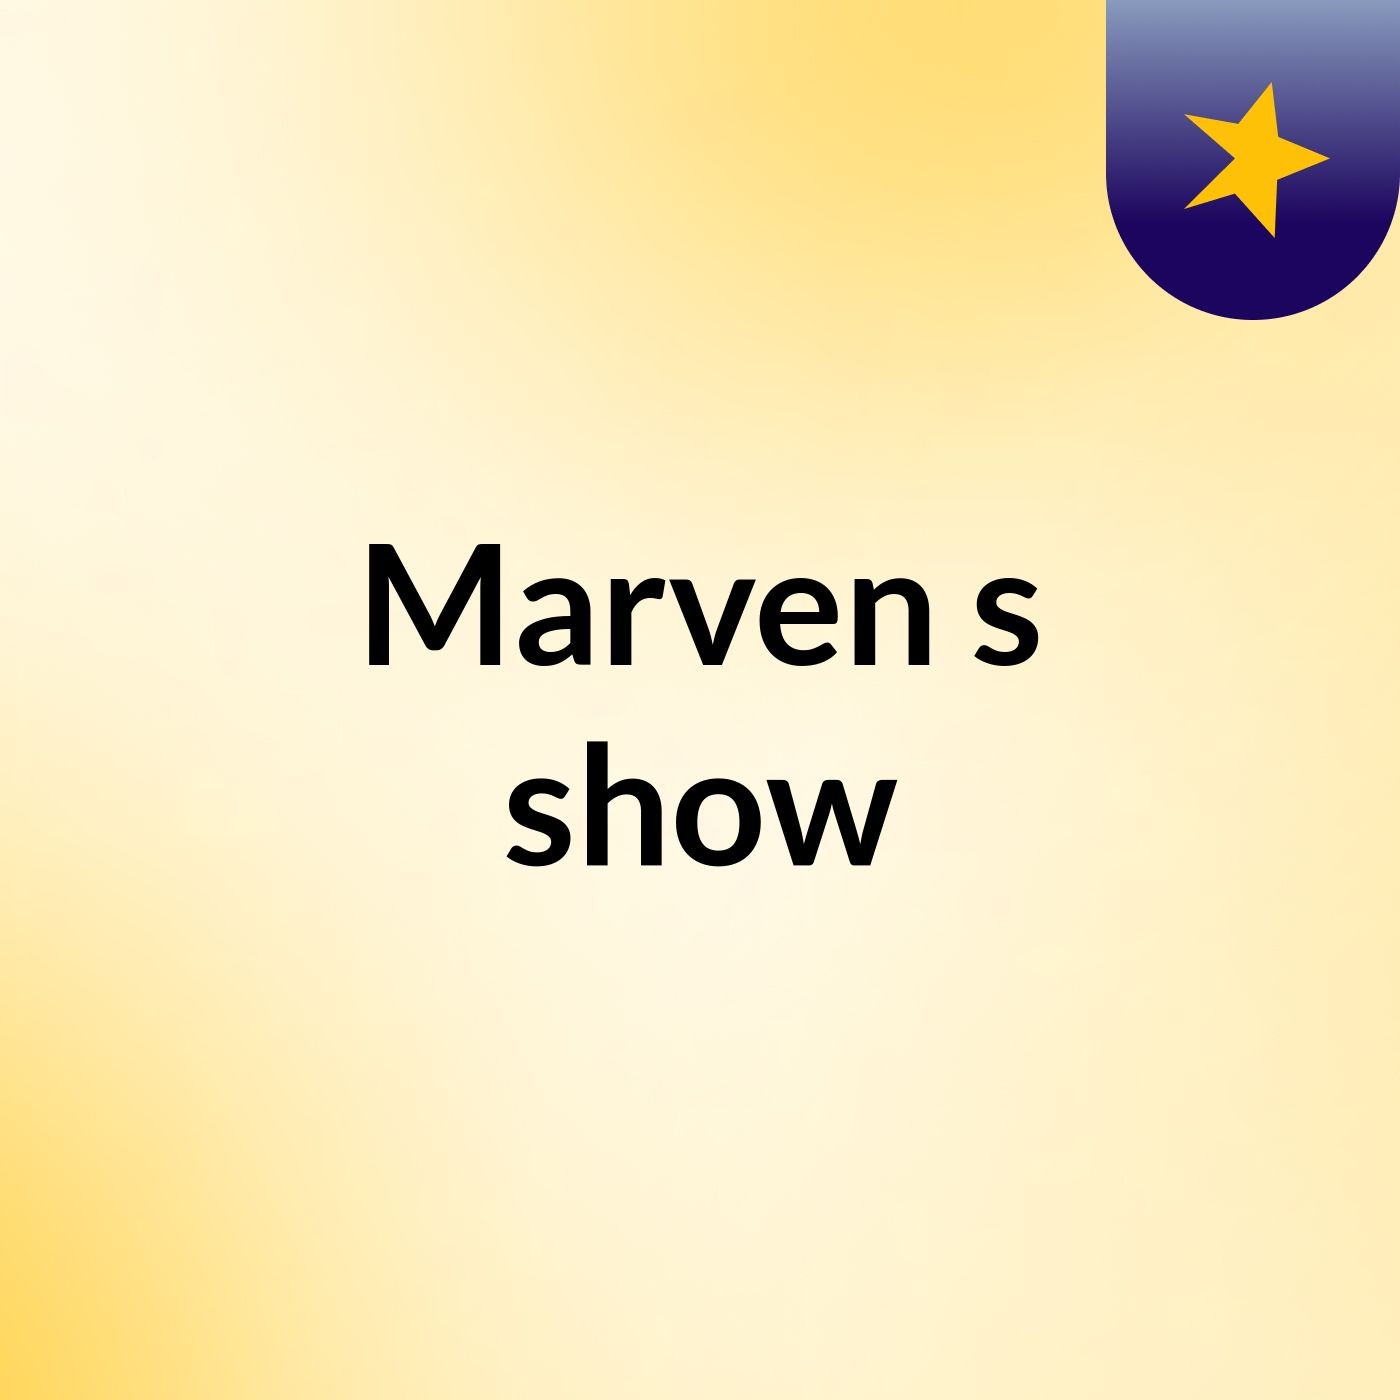 Marven's show